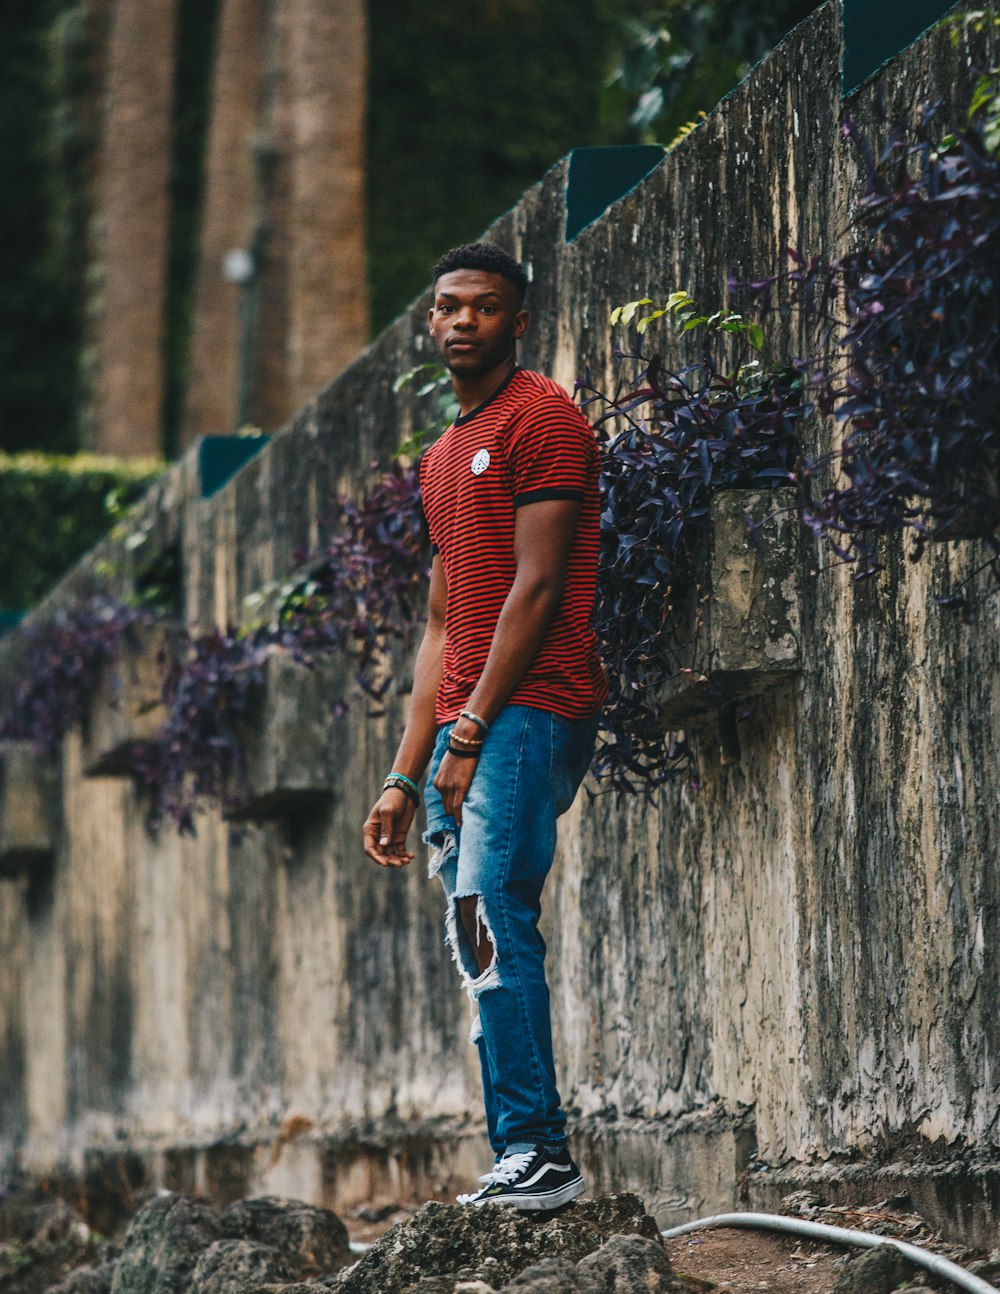 An African American man in ripped jeans and a red striped shirt.